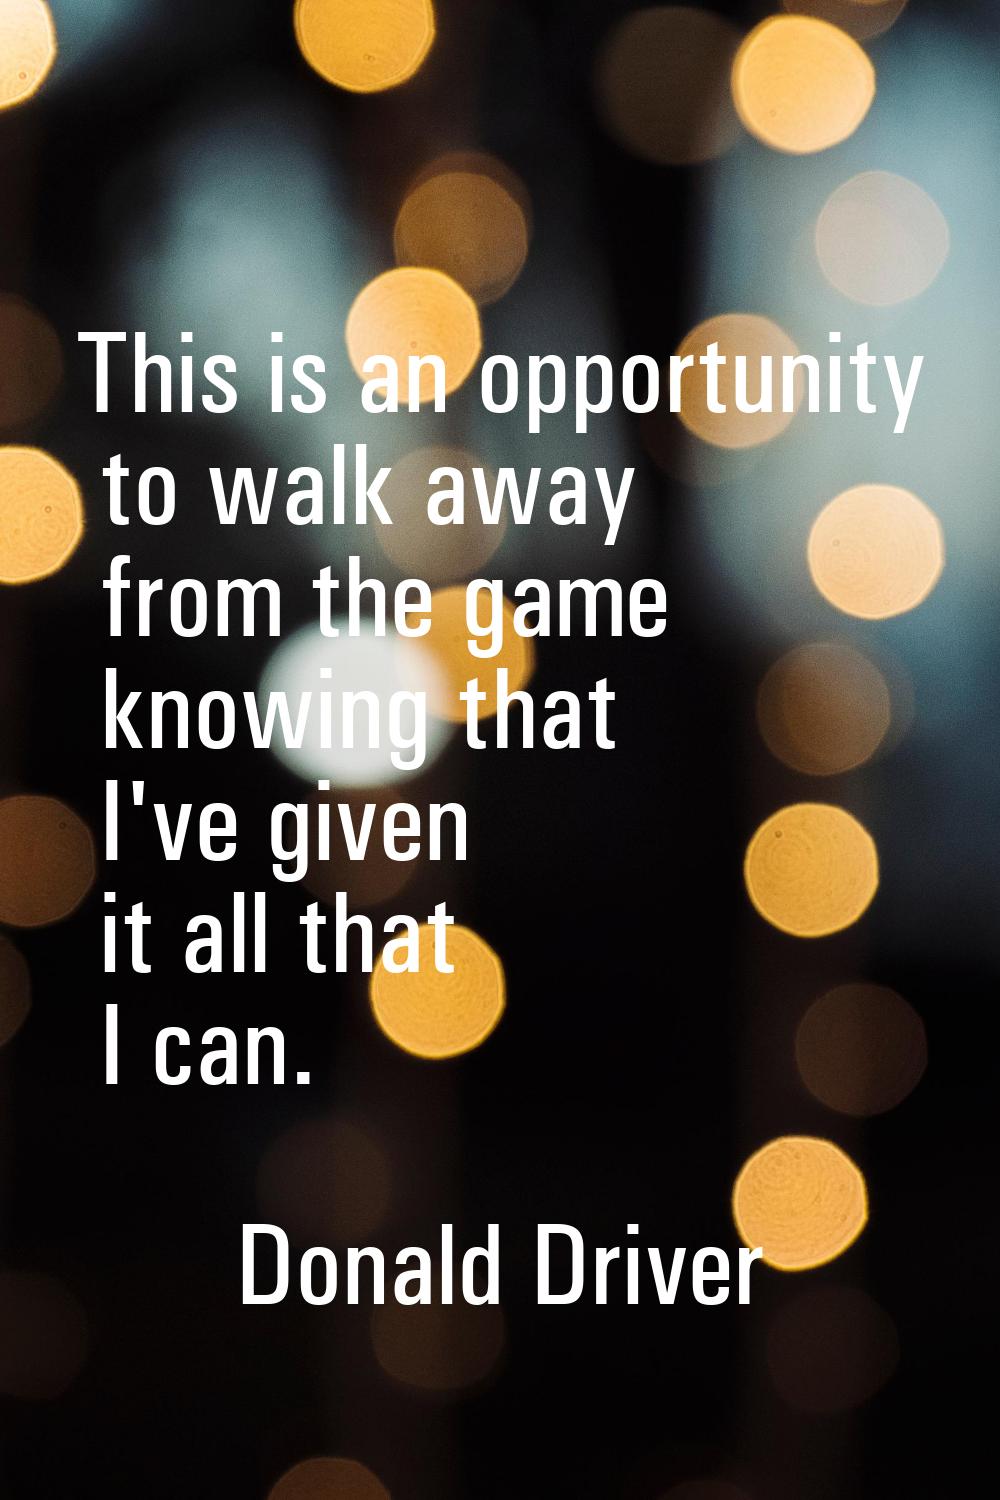 This is an opportunity to walk away from the game knowing that I've given it all that I can.